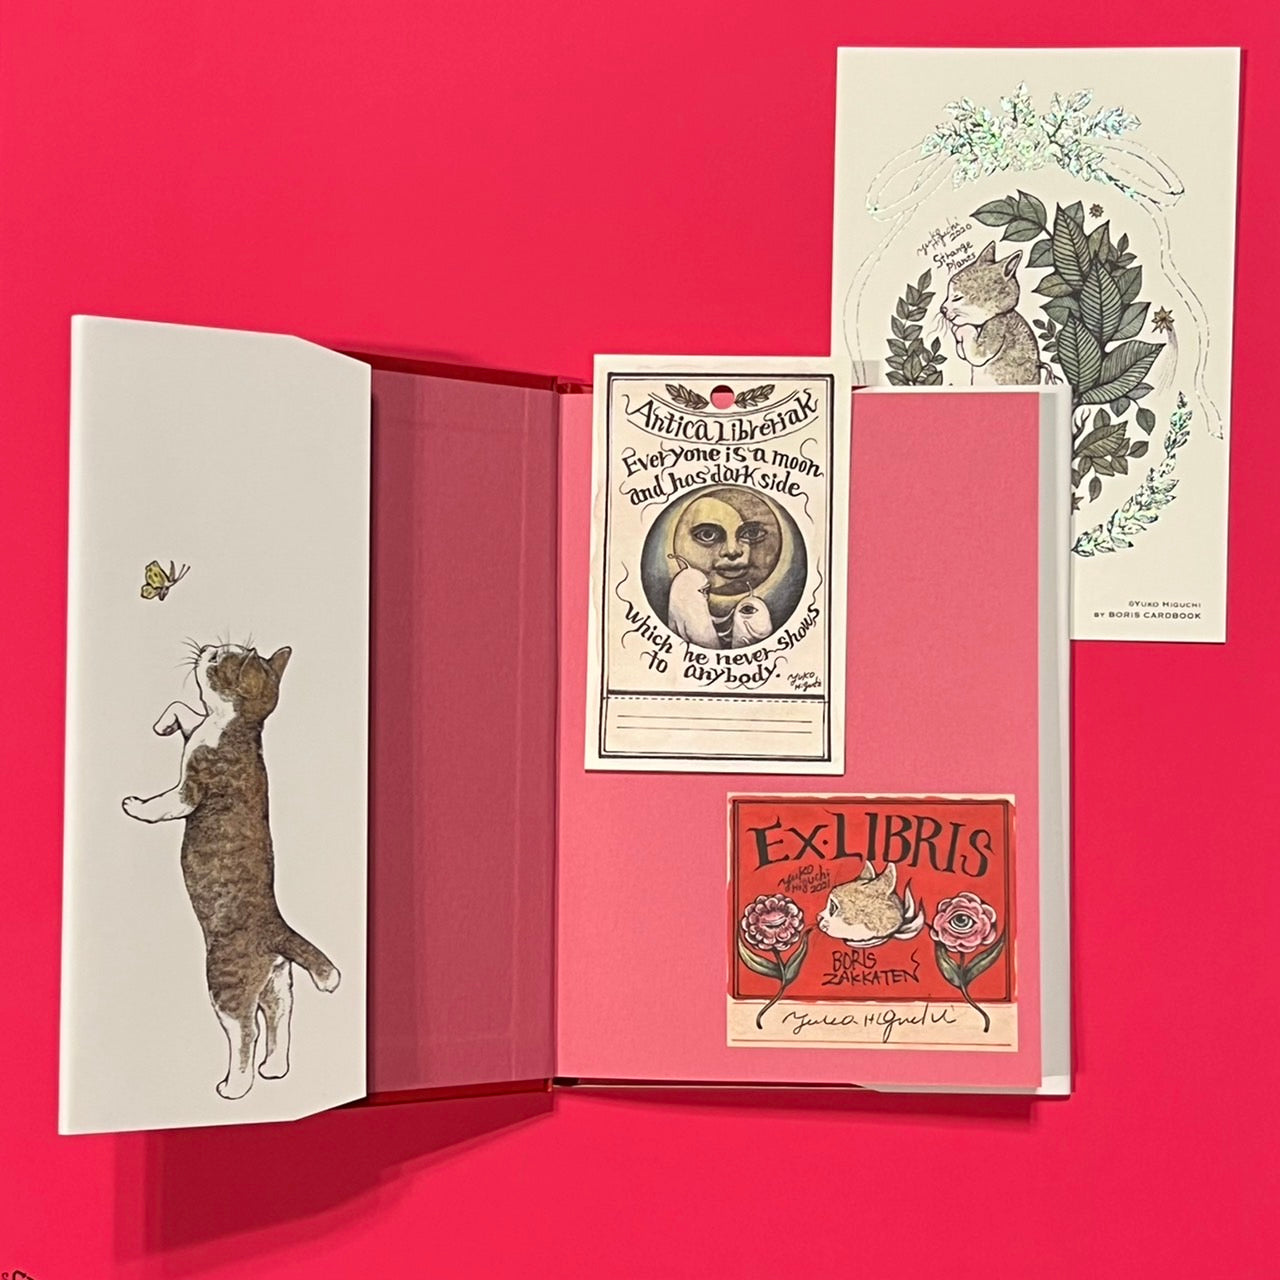 [Signed book with new issue pre-order bonus] Boris card book (bookplate: red)